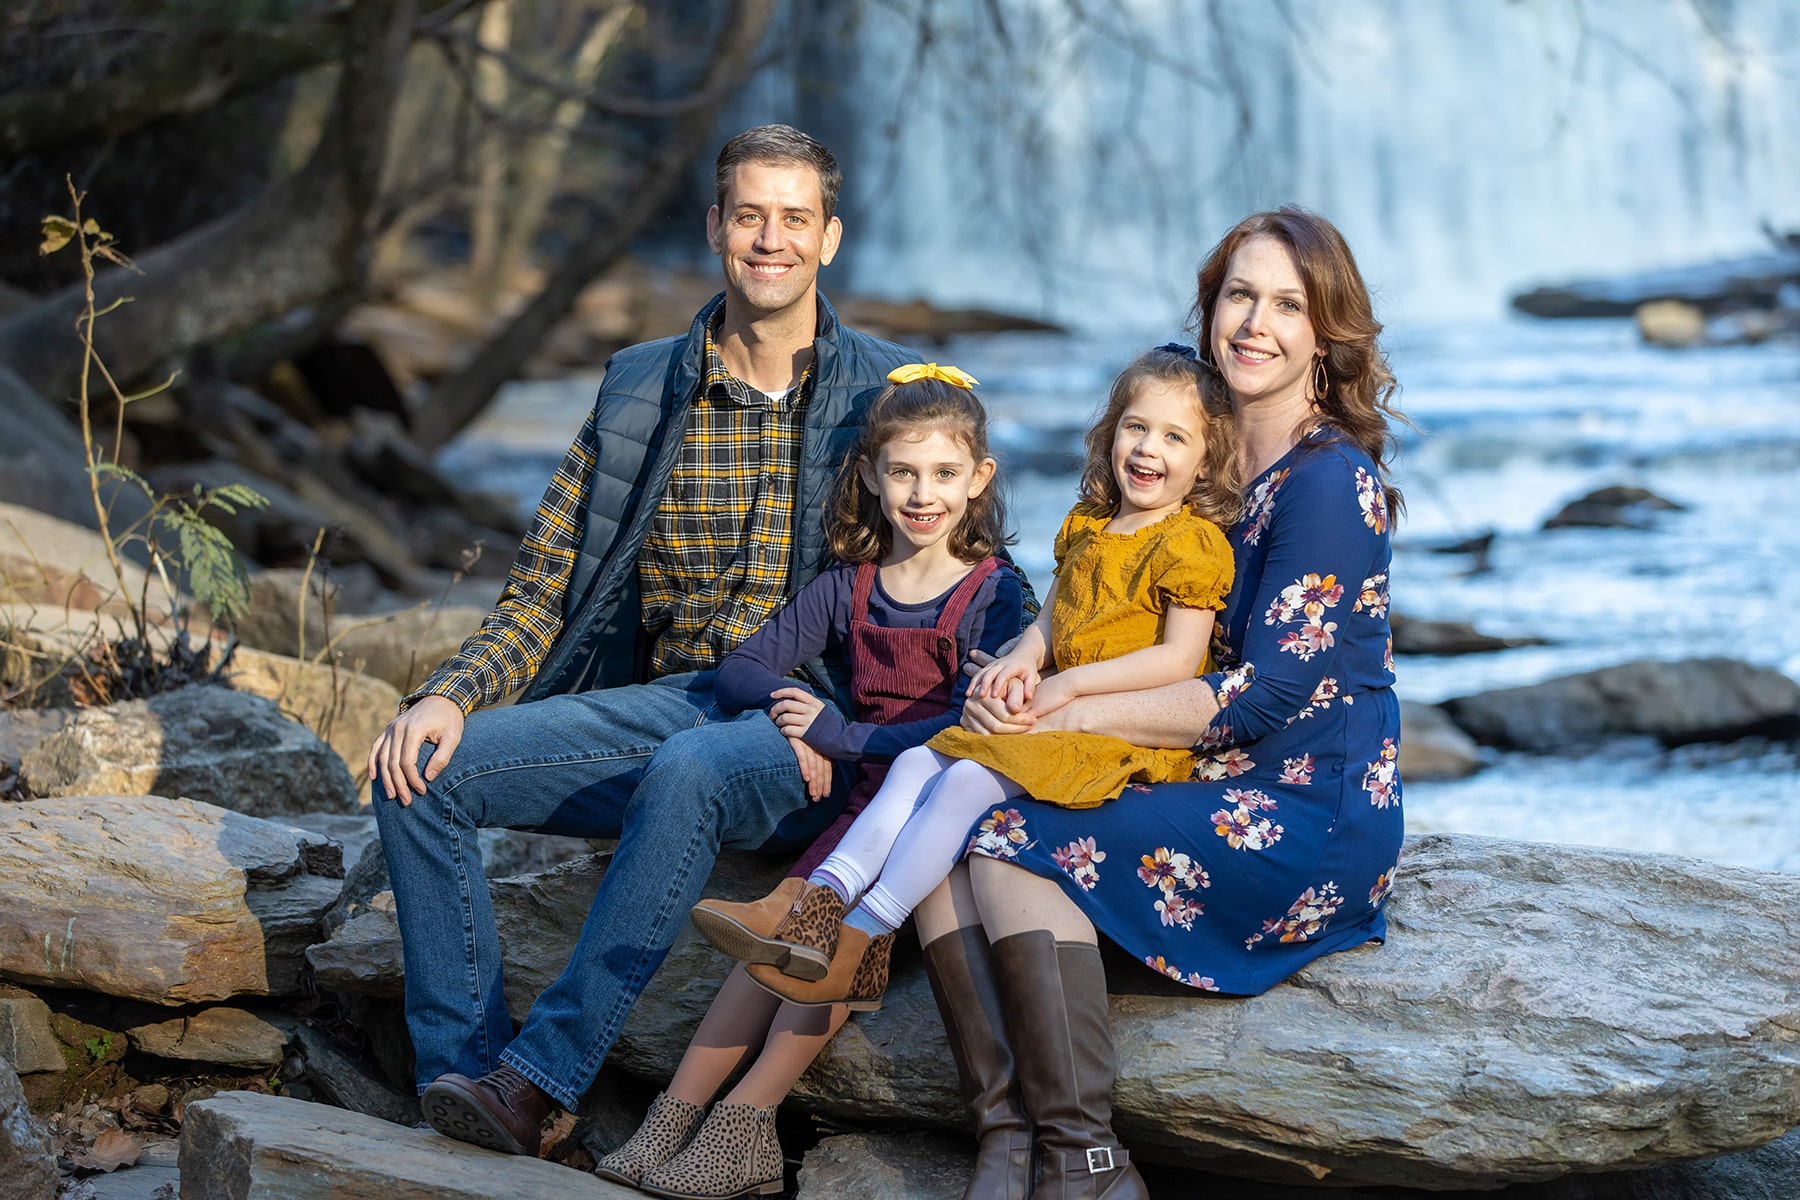 A family of four consisting of dad, mom and their two daughters sitting on a large stone with waterfall in the background